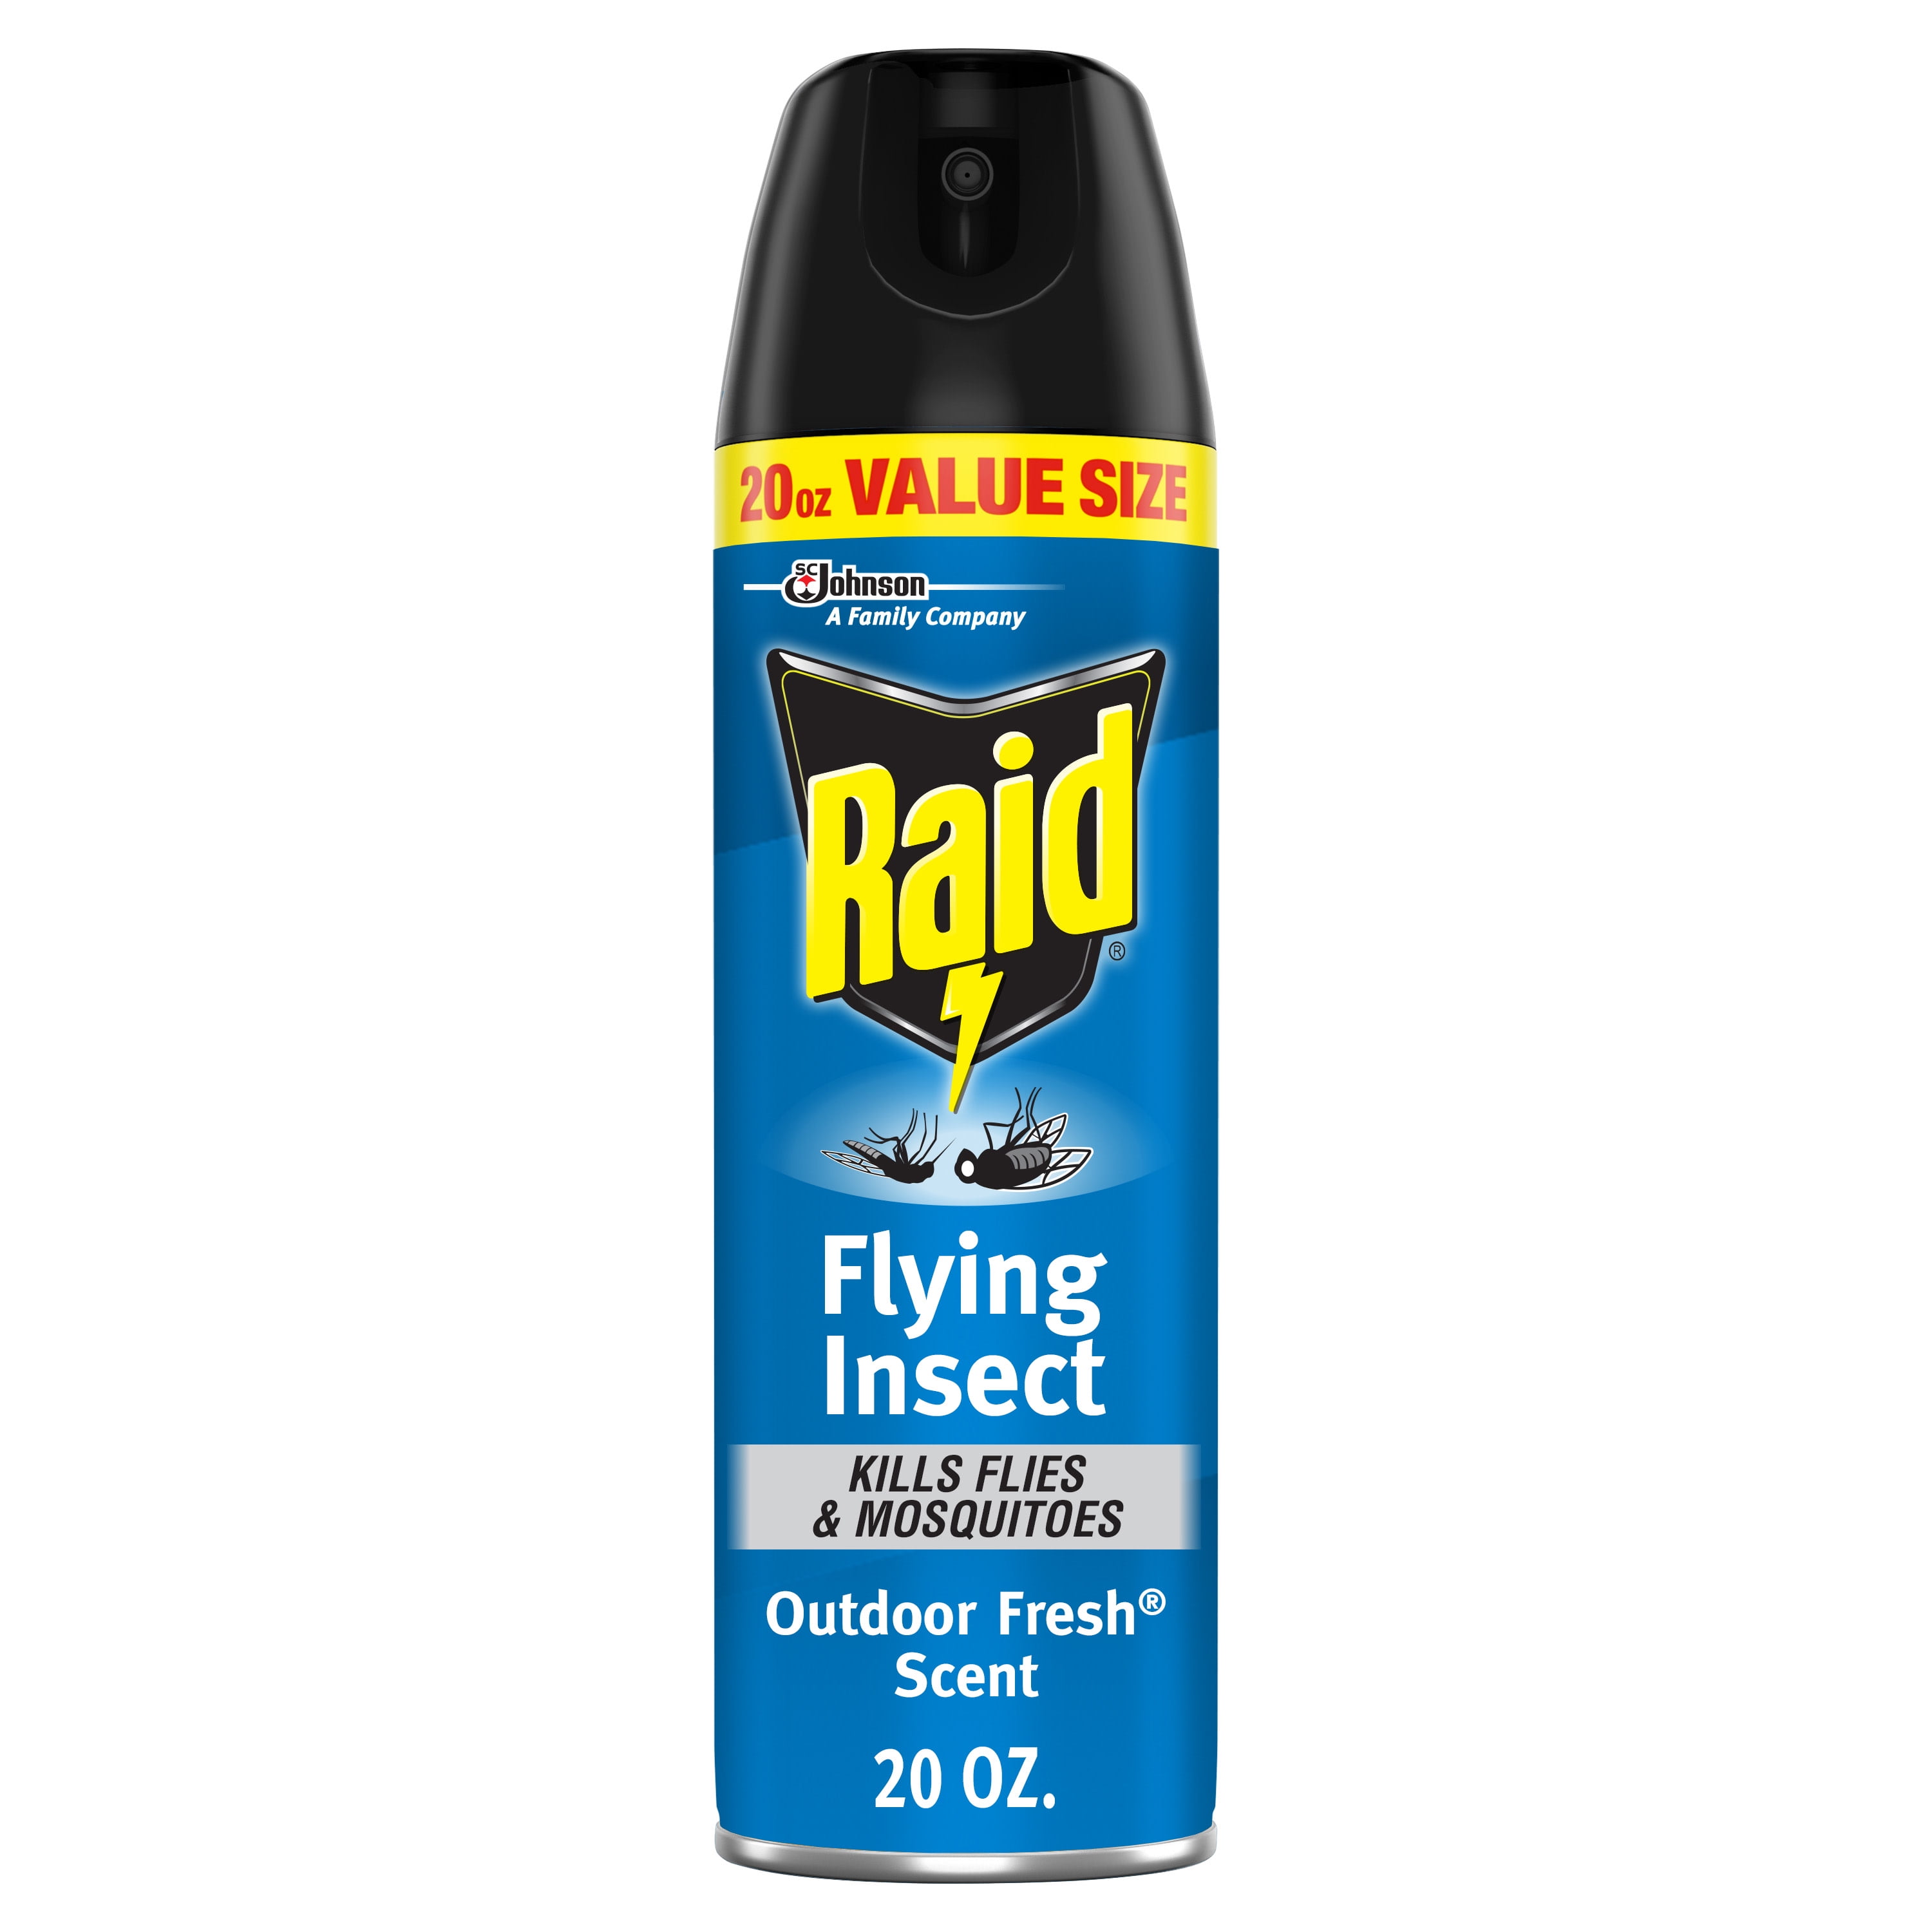 Raid Flying Insect Killer 7 Insecticide Aerosol Spray, Outdoor Fresh, 20 oz